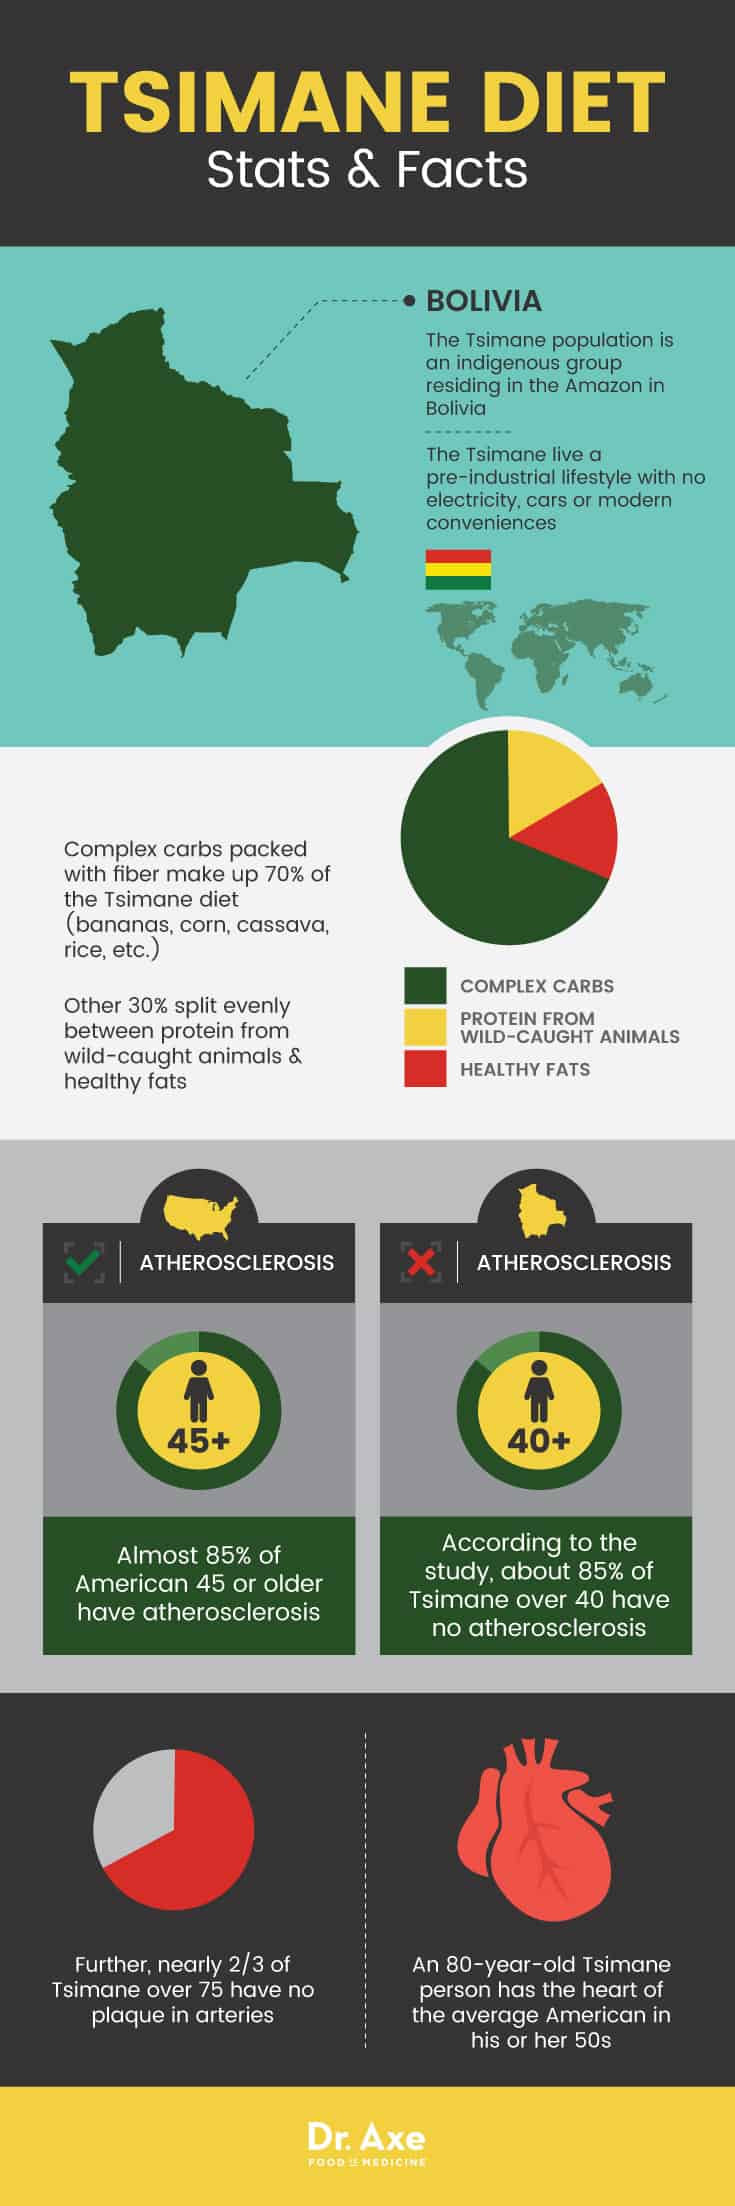 Tsimane diet stats and facts - Dr. Axe